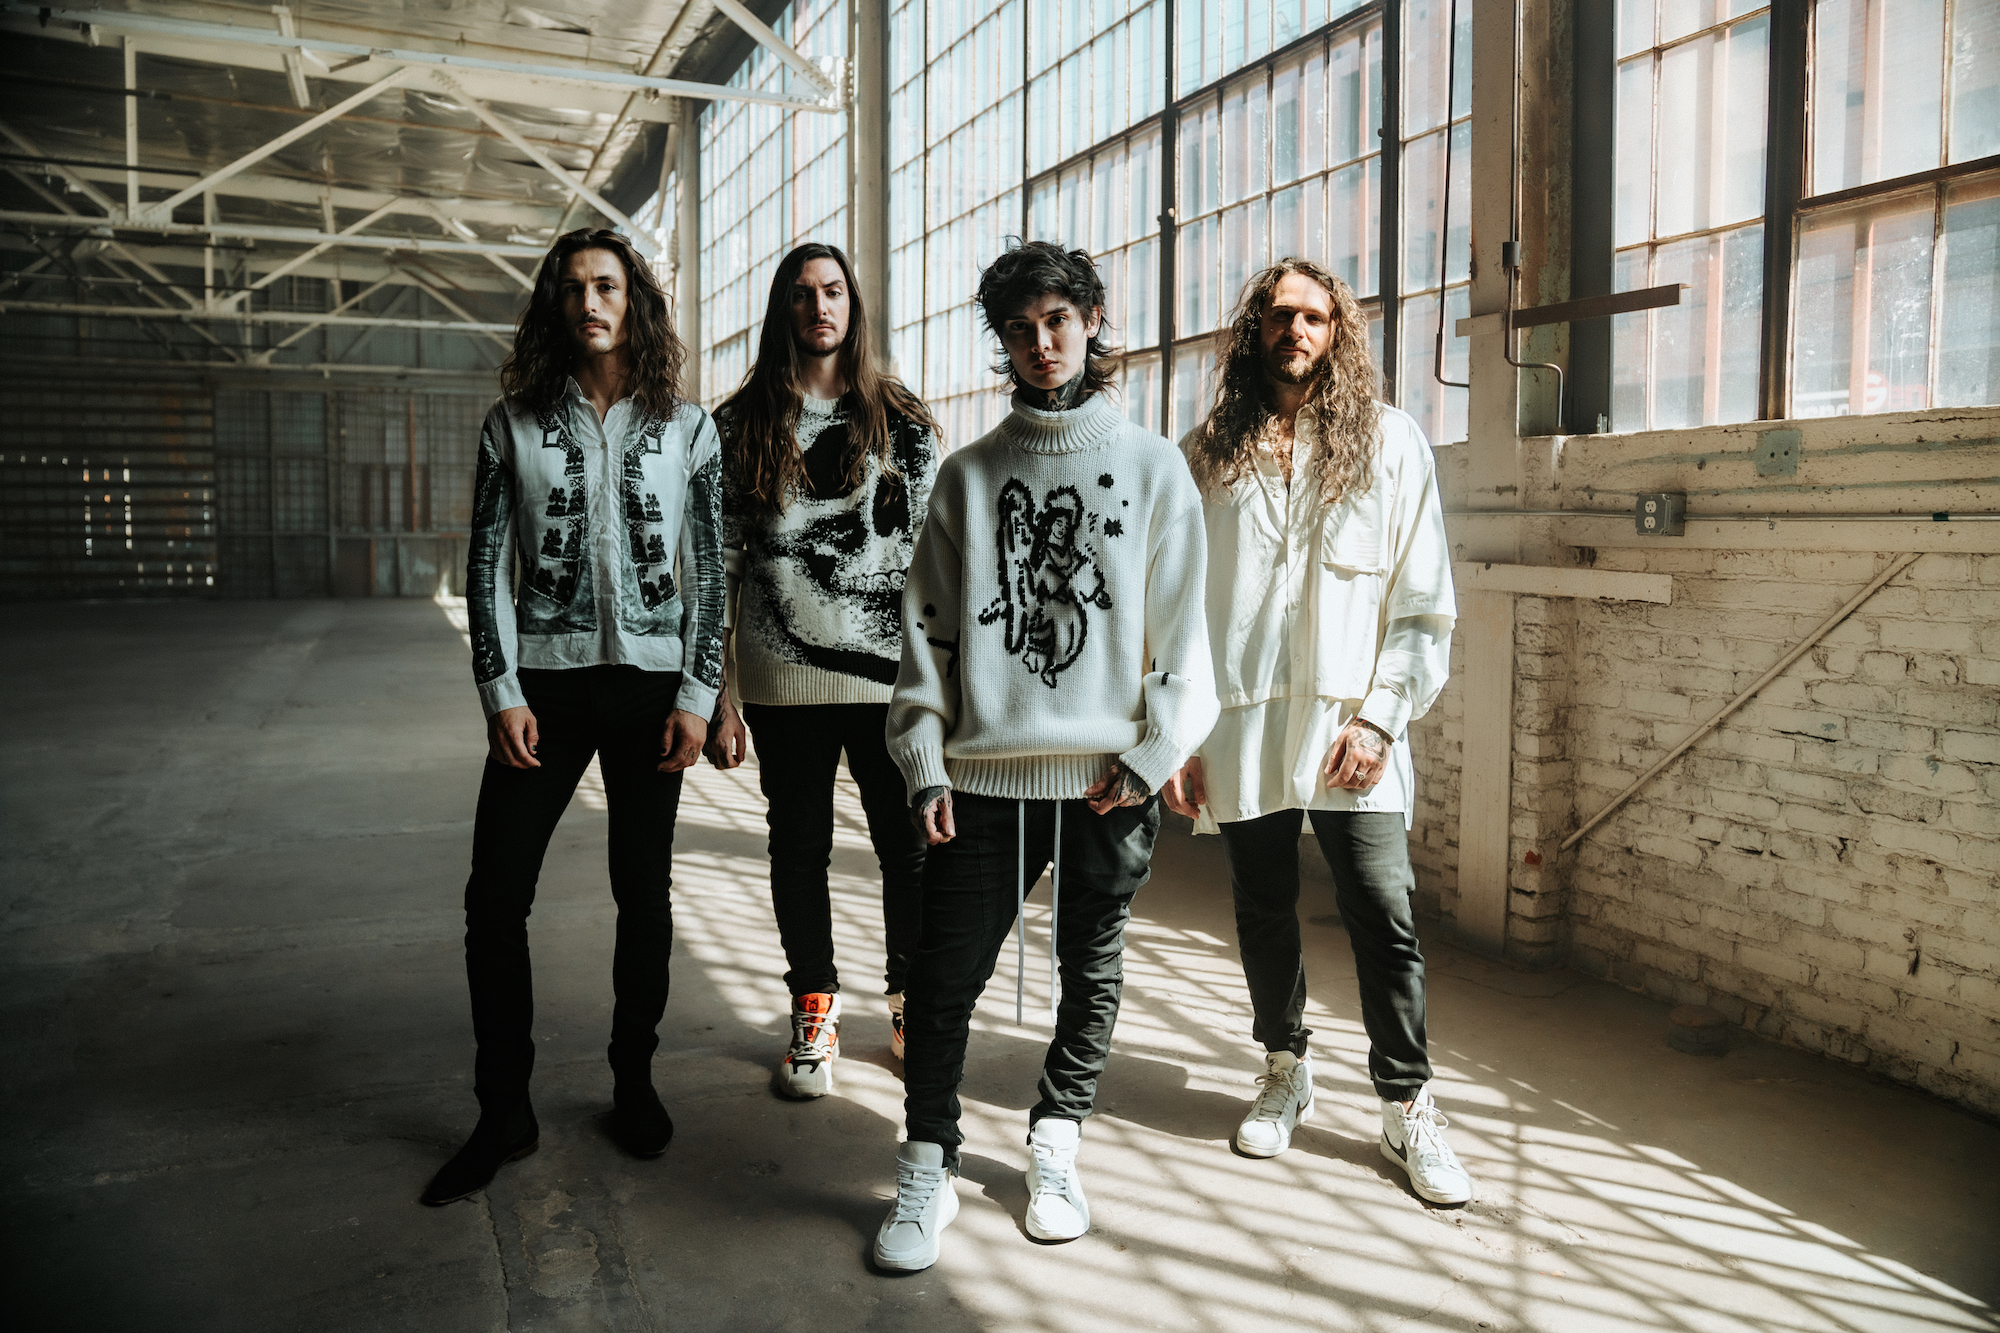 Polyphia's sweater game is as strong as their musicianship. (Photo by Alana Ann Lopez)